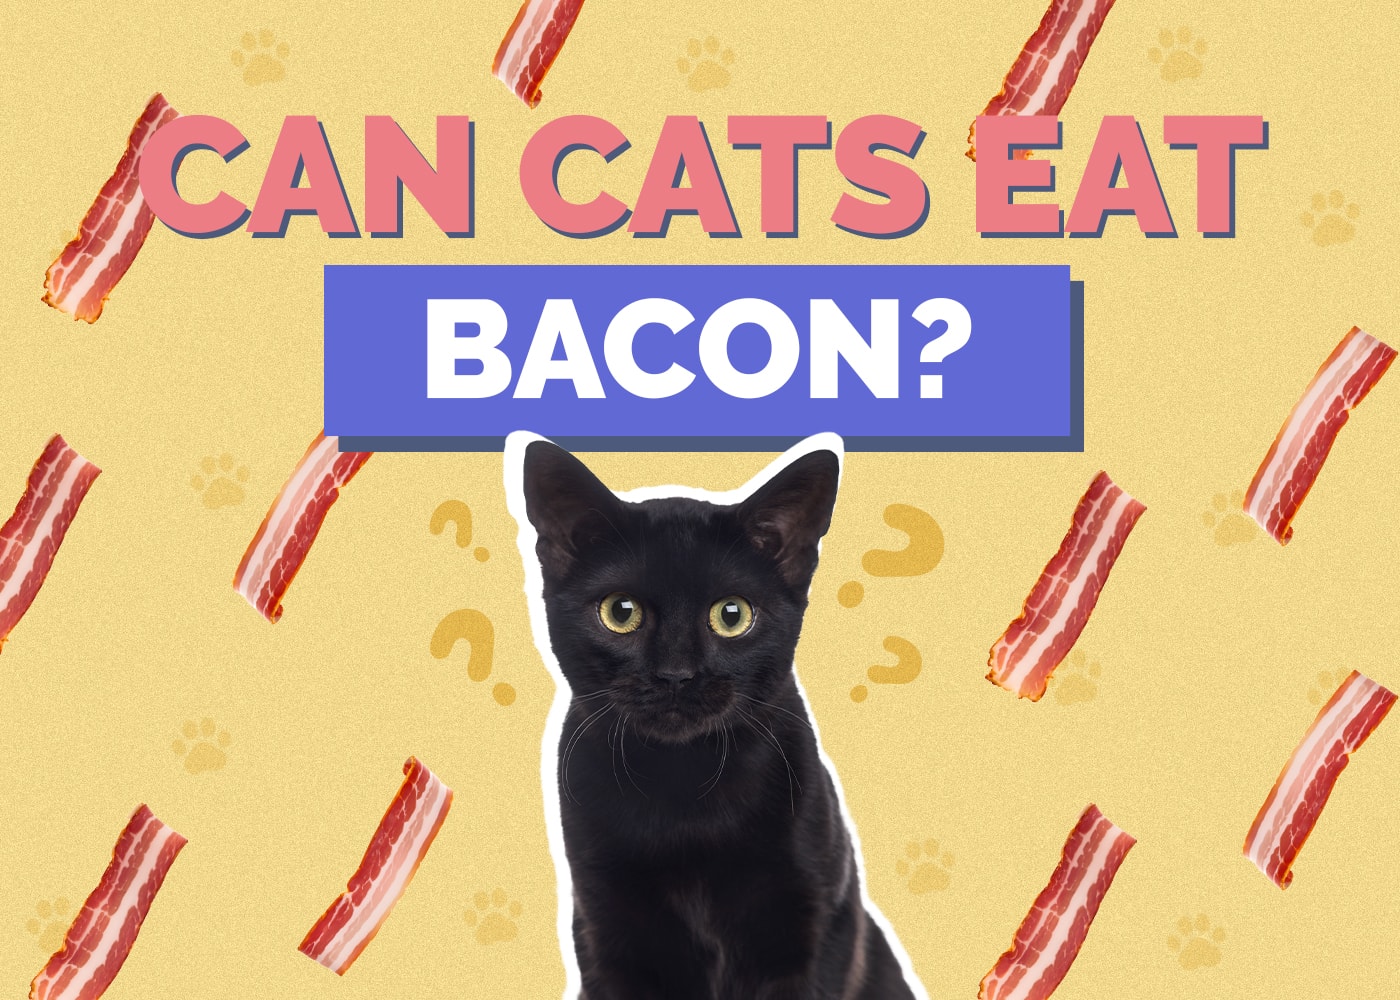 Can Cats Eat bacon